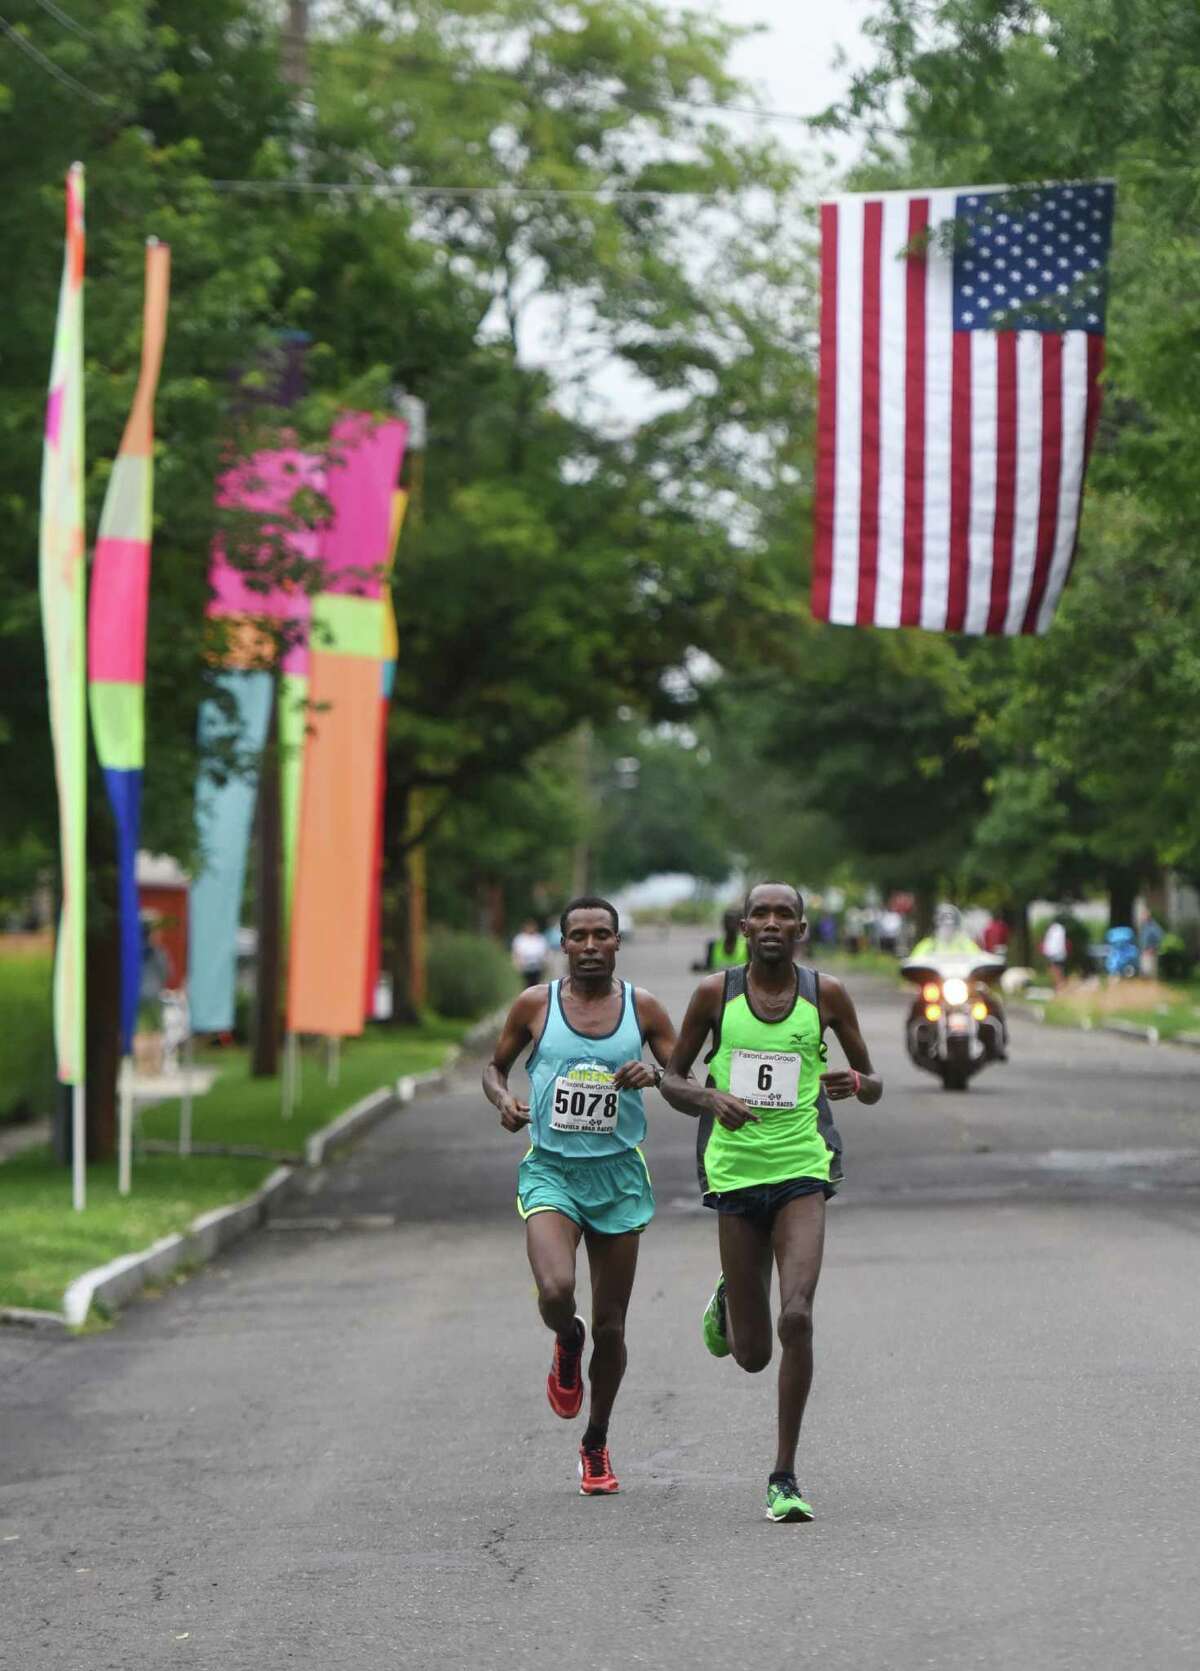 Ethiopia's Gosa Girma Tefera, left, battles Kenya's Josphat Kiptanui Too in the final miles of the Faxon Law Group Fairfield Half Marathon at Jennings Beach in Fairfield, Conn. Sunday, June 28, 2015. Gosa Girma Tefera, of Ethiopia, was the first place overall finisher with a time of 1:04:05 and Josphat Kiptanui Too finished in second with a time of 1:04:09. Etaferahu Temesgen, of Ethiopia, was the first female finisher with a time of 1:14:09.